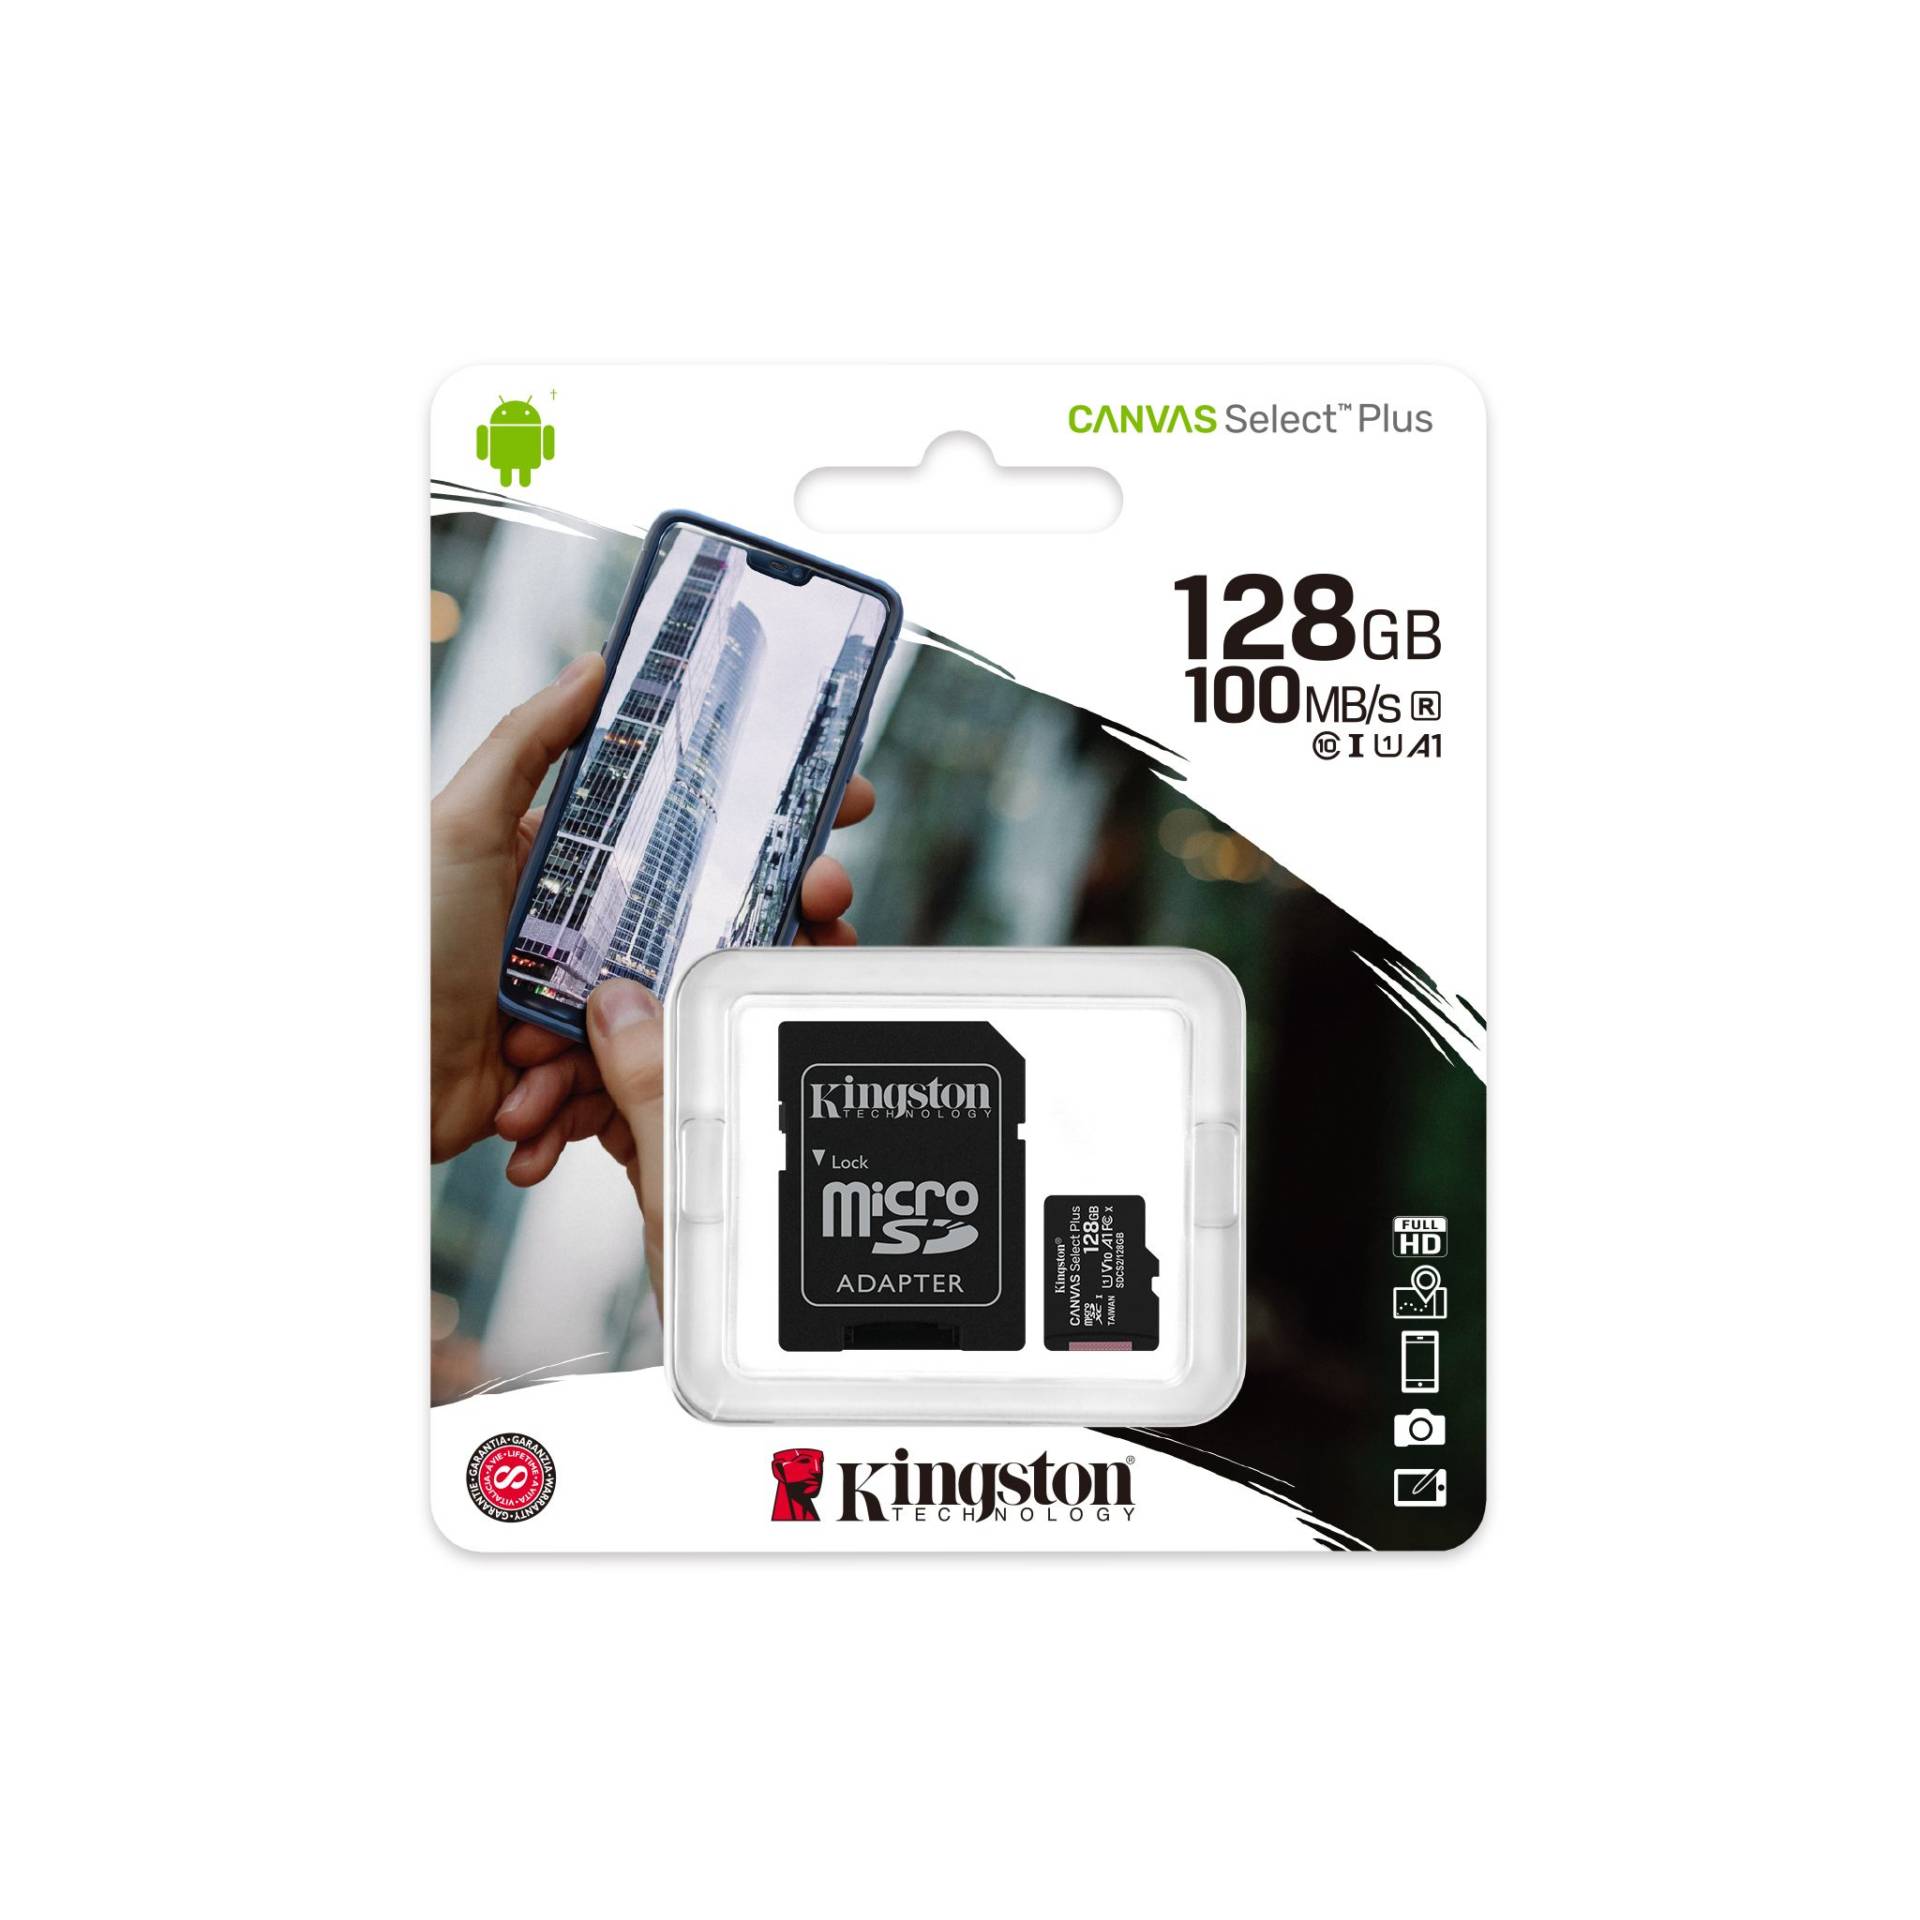 CH804KNG02 – SDCS2-128GB – KINGSTON CANVAS SELECT PLUS.03